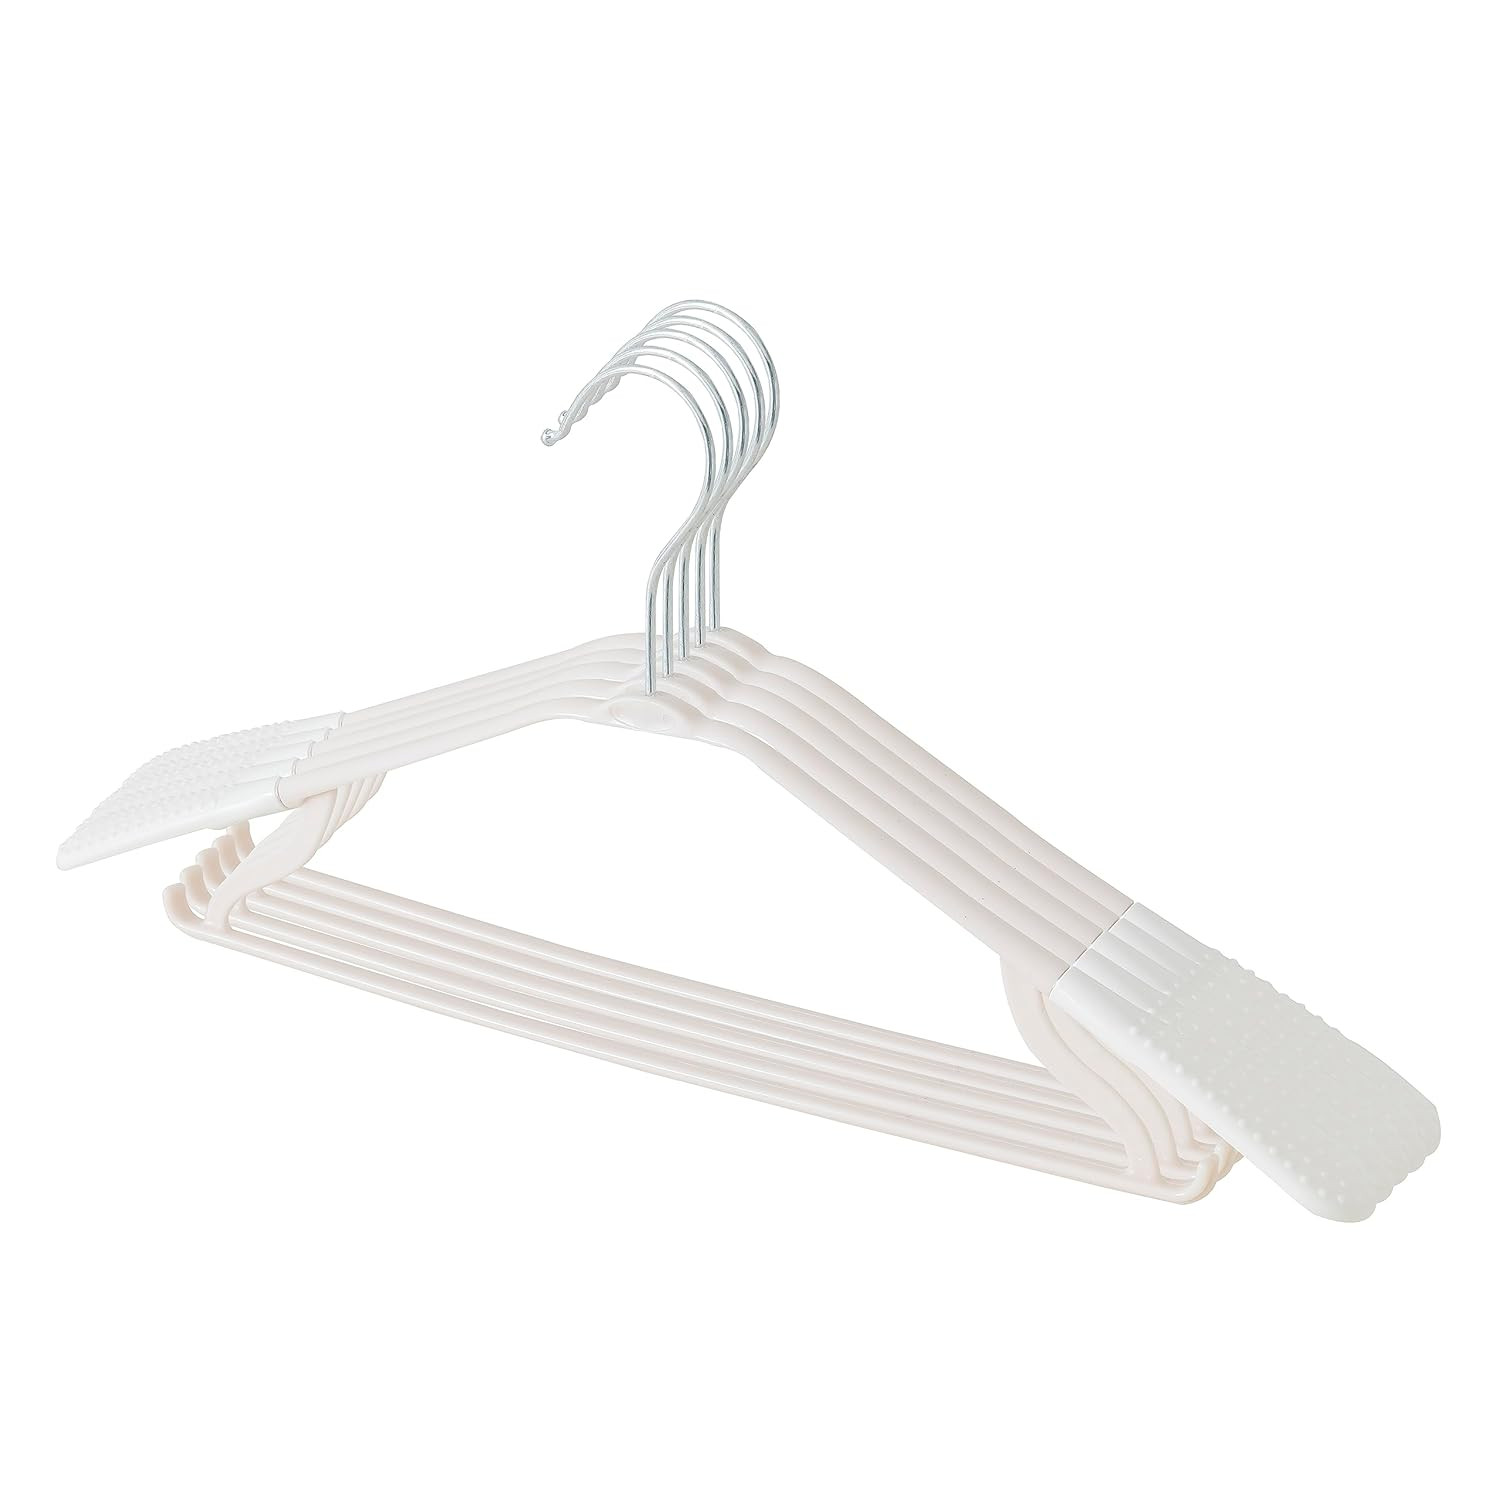 Kuber IndustriesPP Cloth Hanger Set of 5 With Zinc Plated Steel Hook (White)